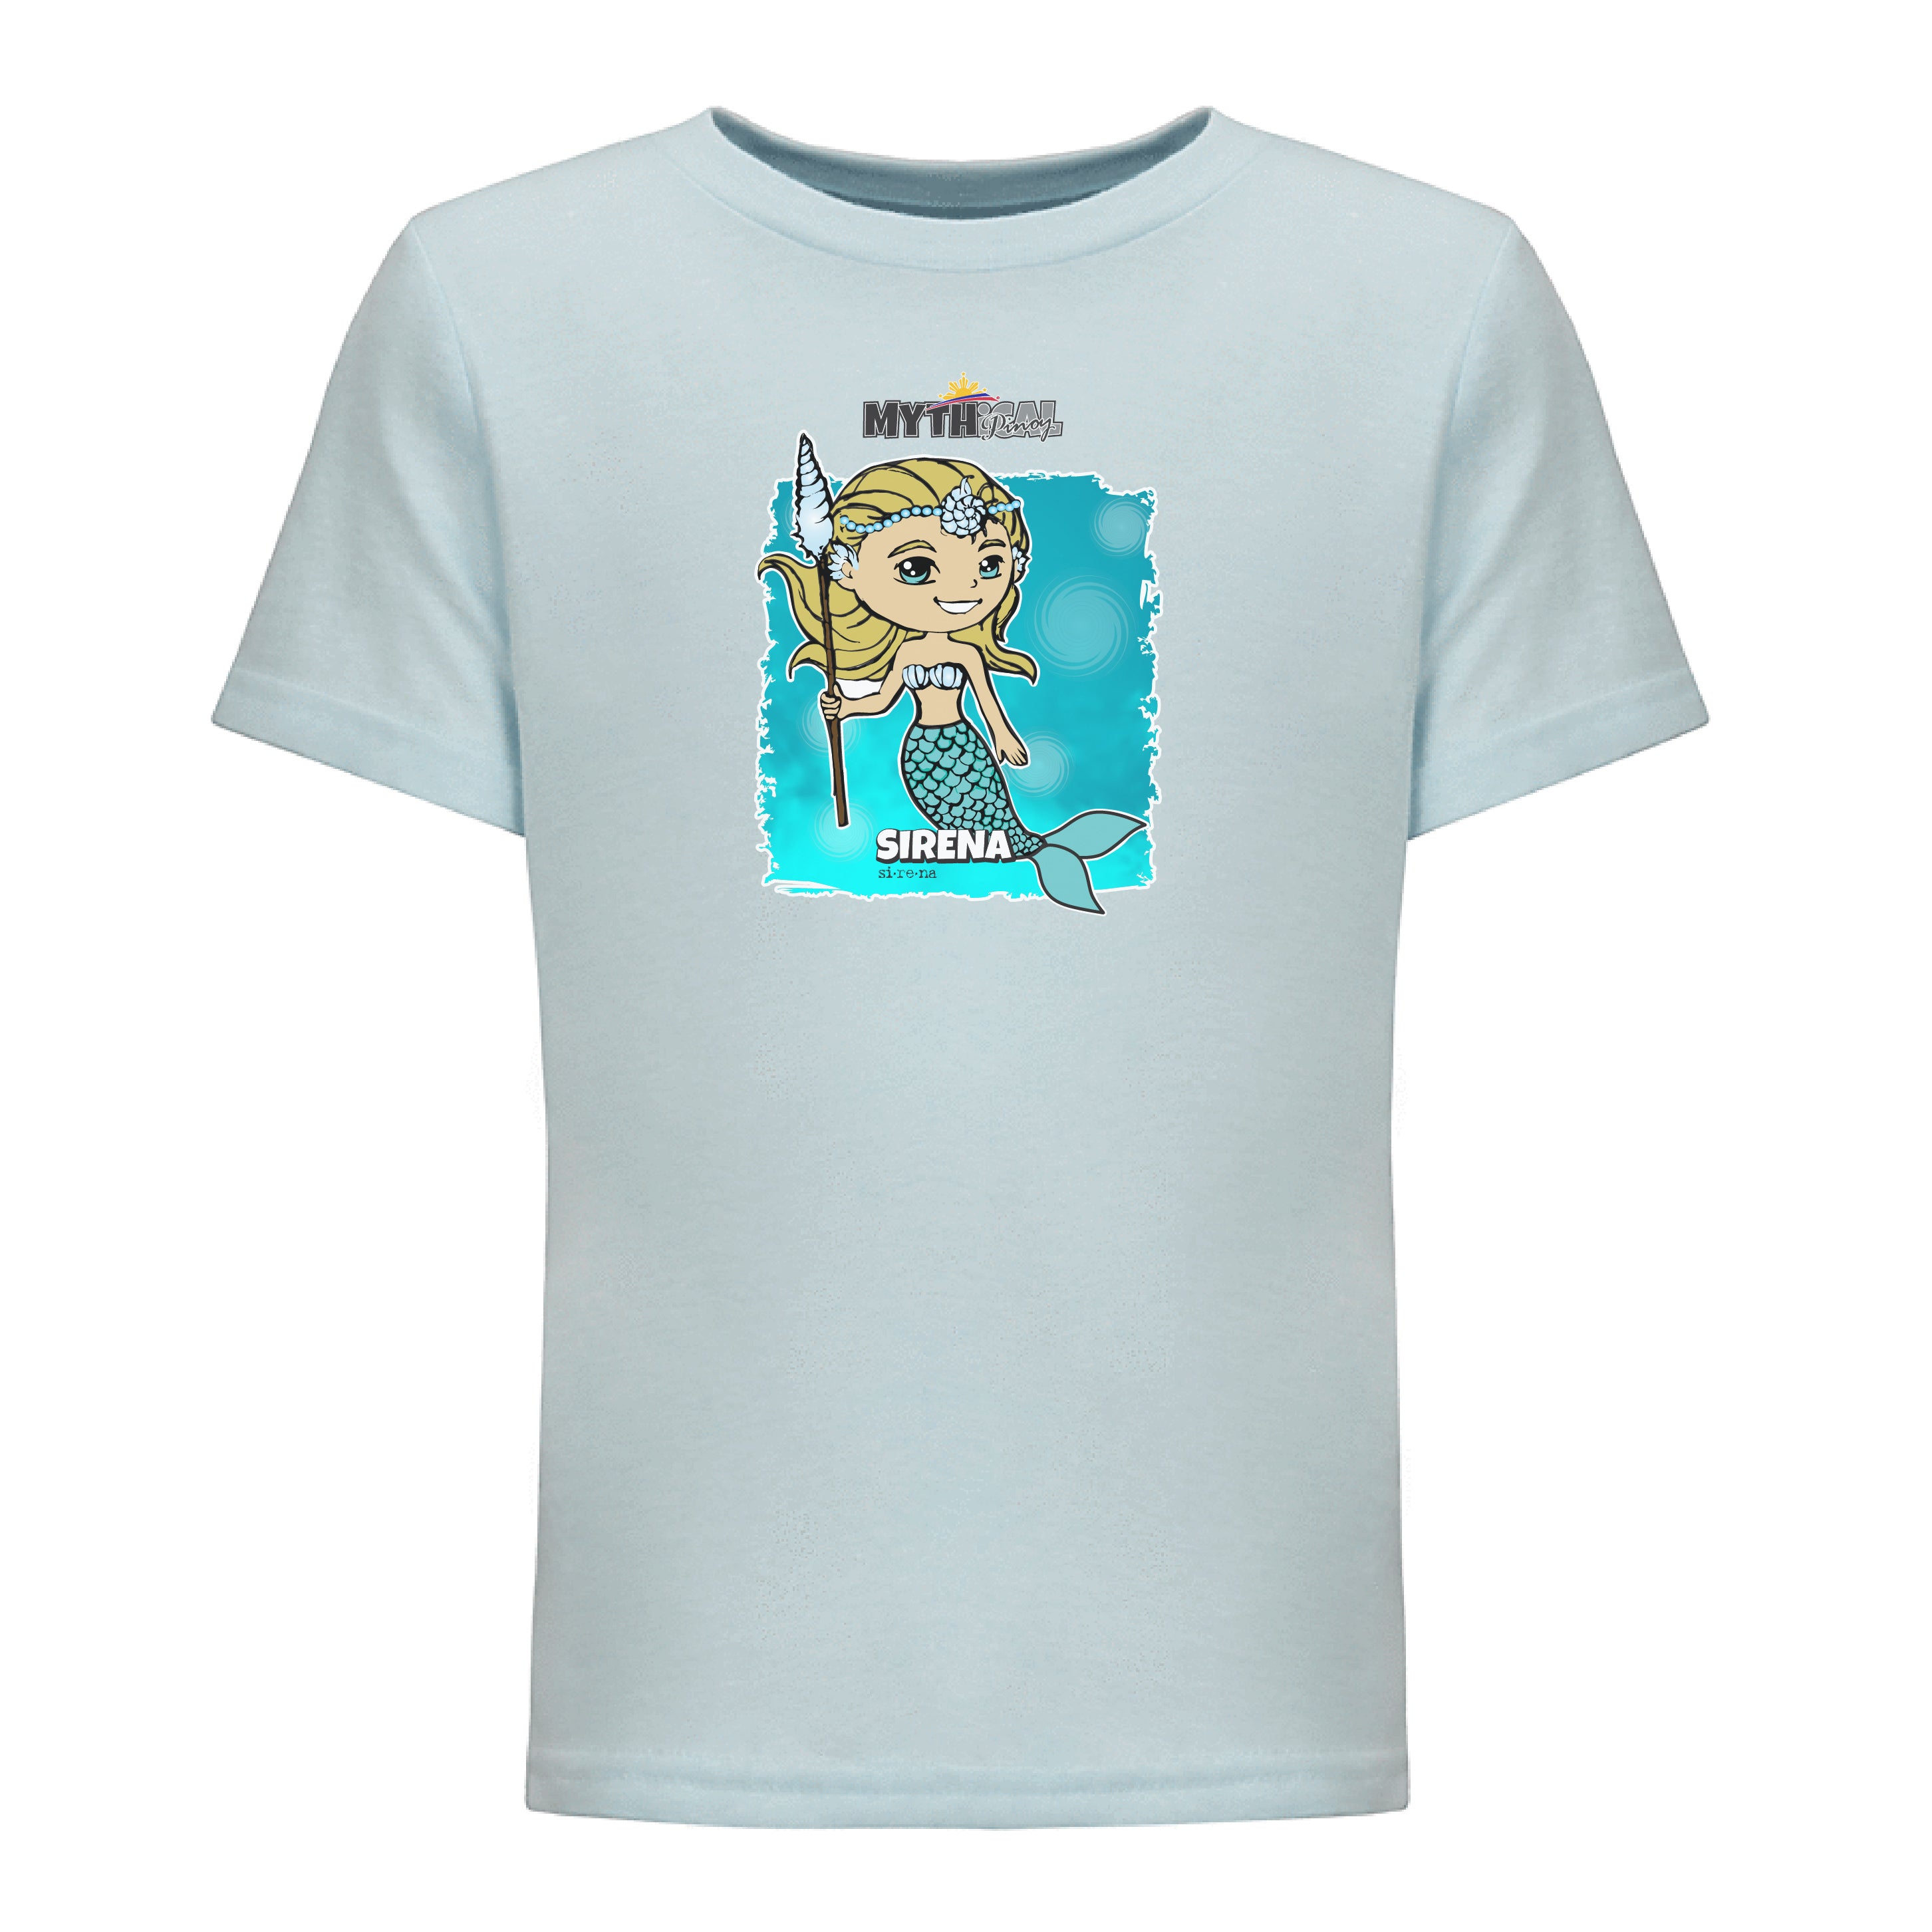 Philippine Mythical Creatures Shirt - Youth - Sirena